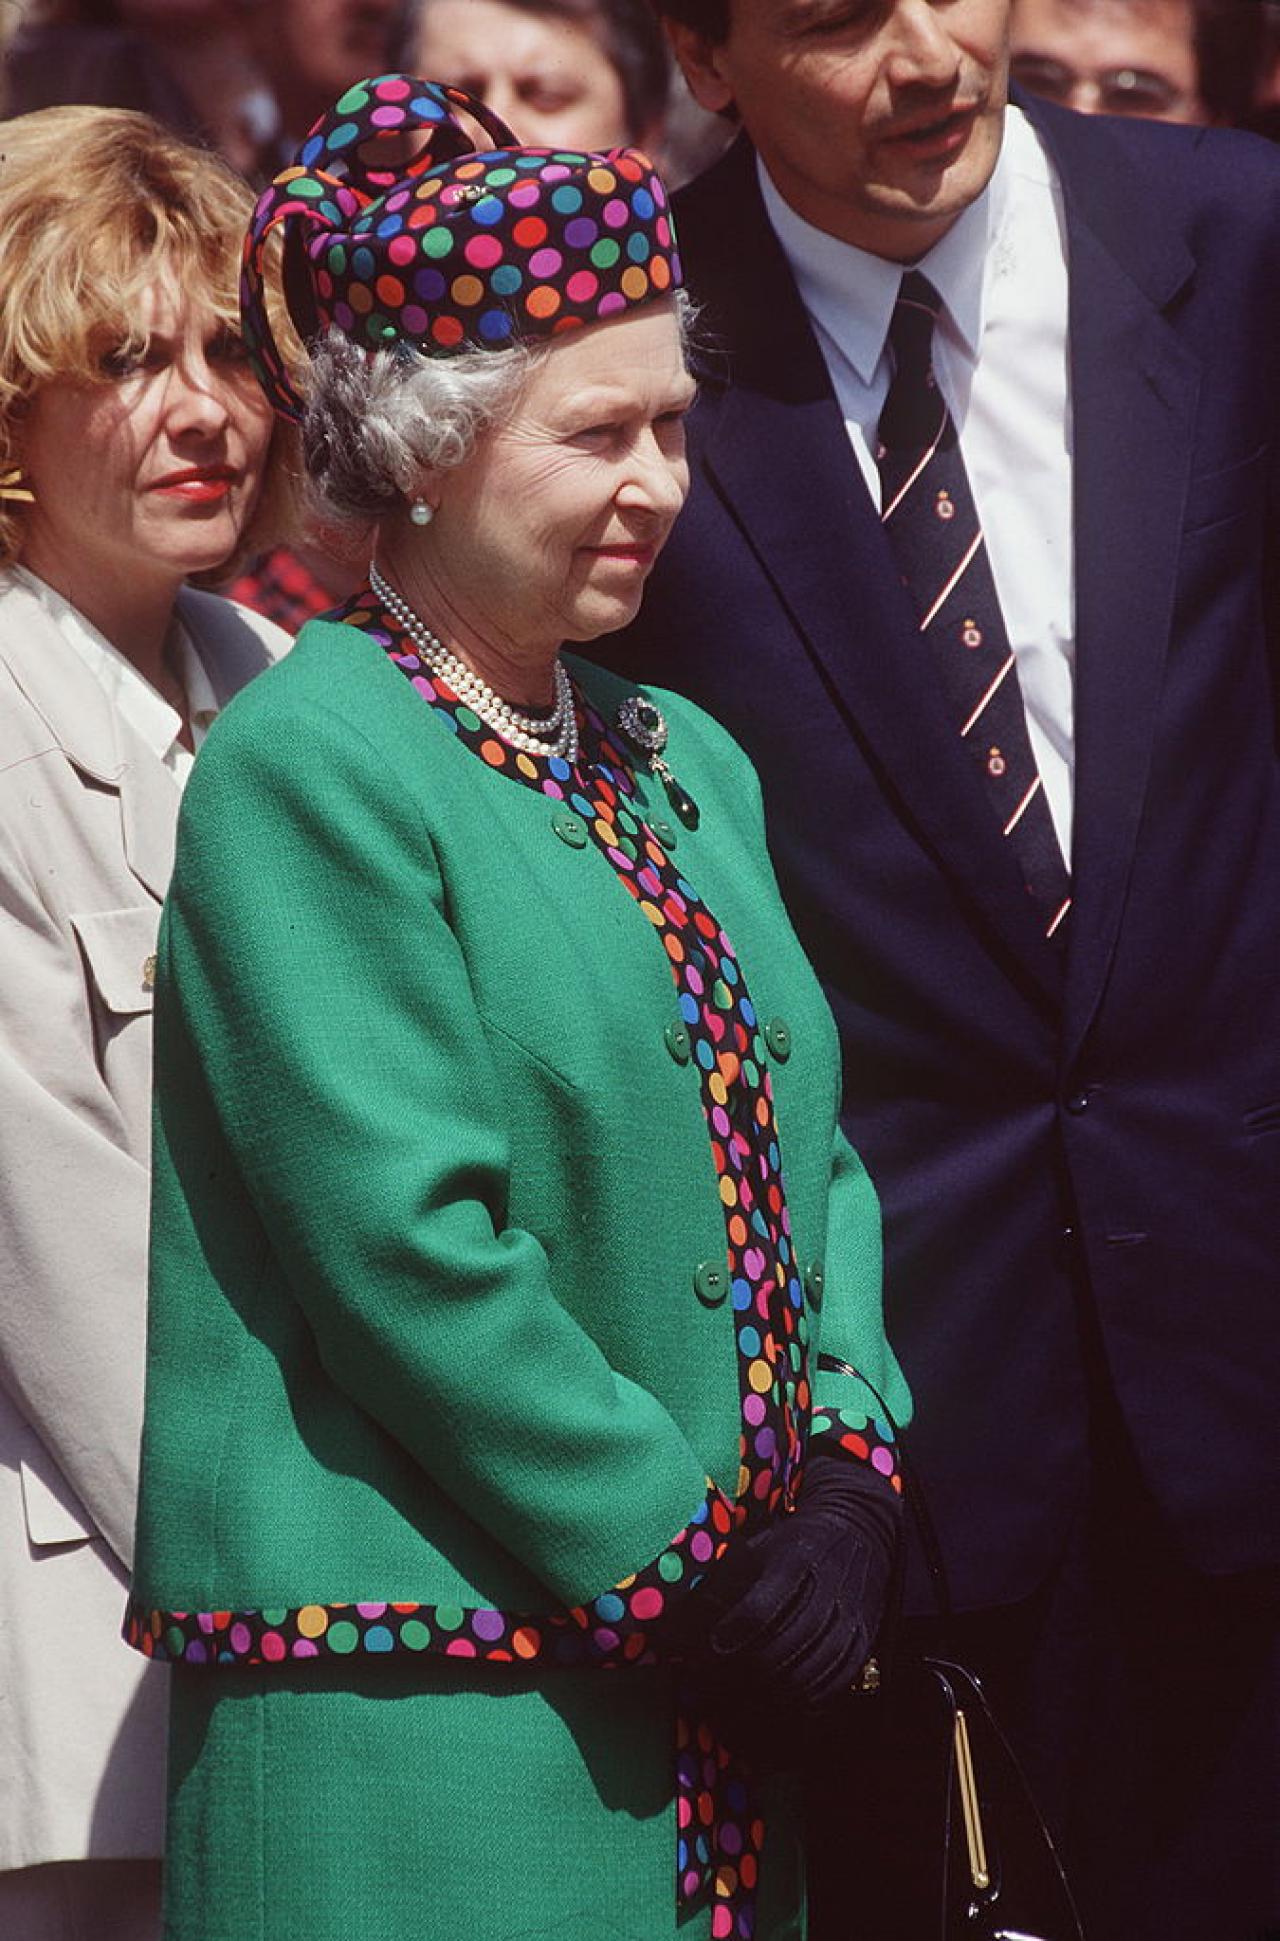 BUDAPEST, HUNGARY - MAY 07:  The Queen In Budapest, Hungary. The Queen's Hat Is By Marie O'regan And Her Suit Is By Fashion Designer Ian Thomas.  (Photo by Tim Graham Photo Library via Getty Images)